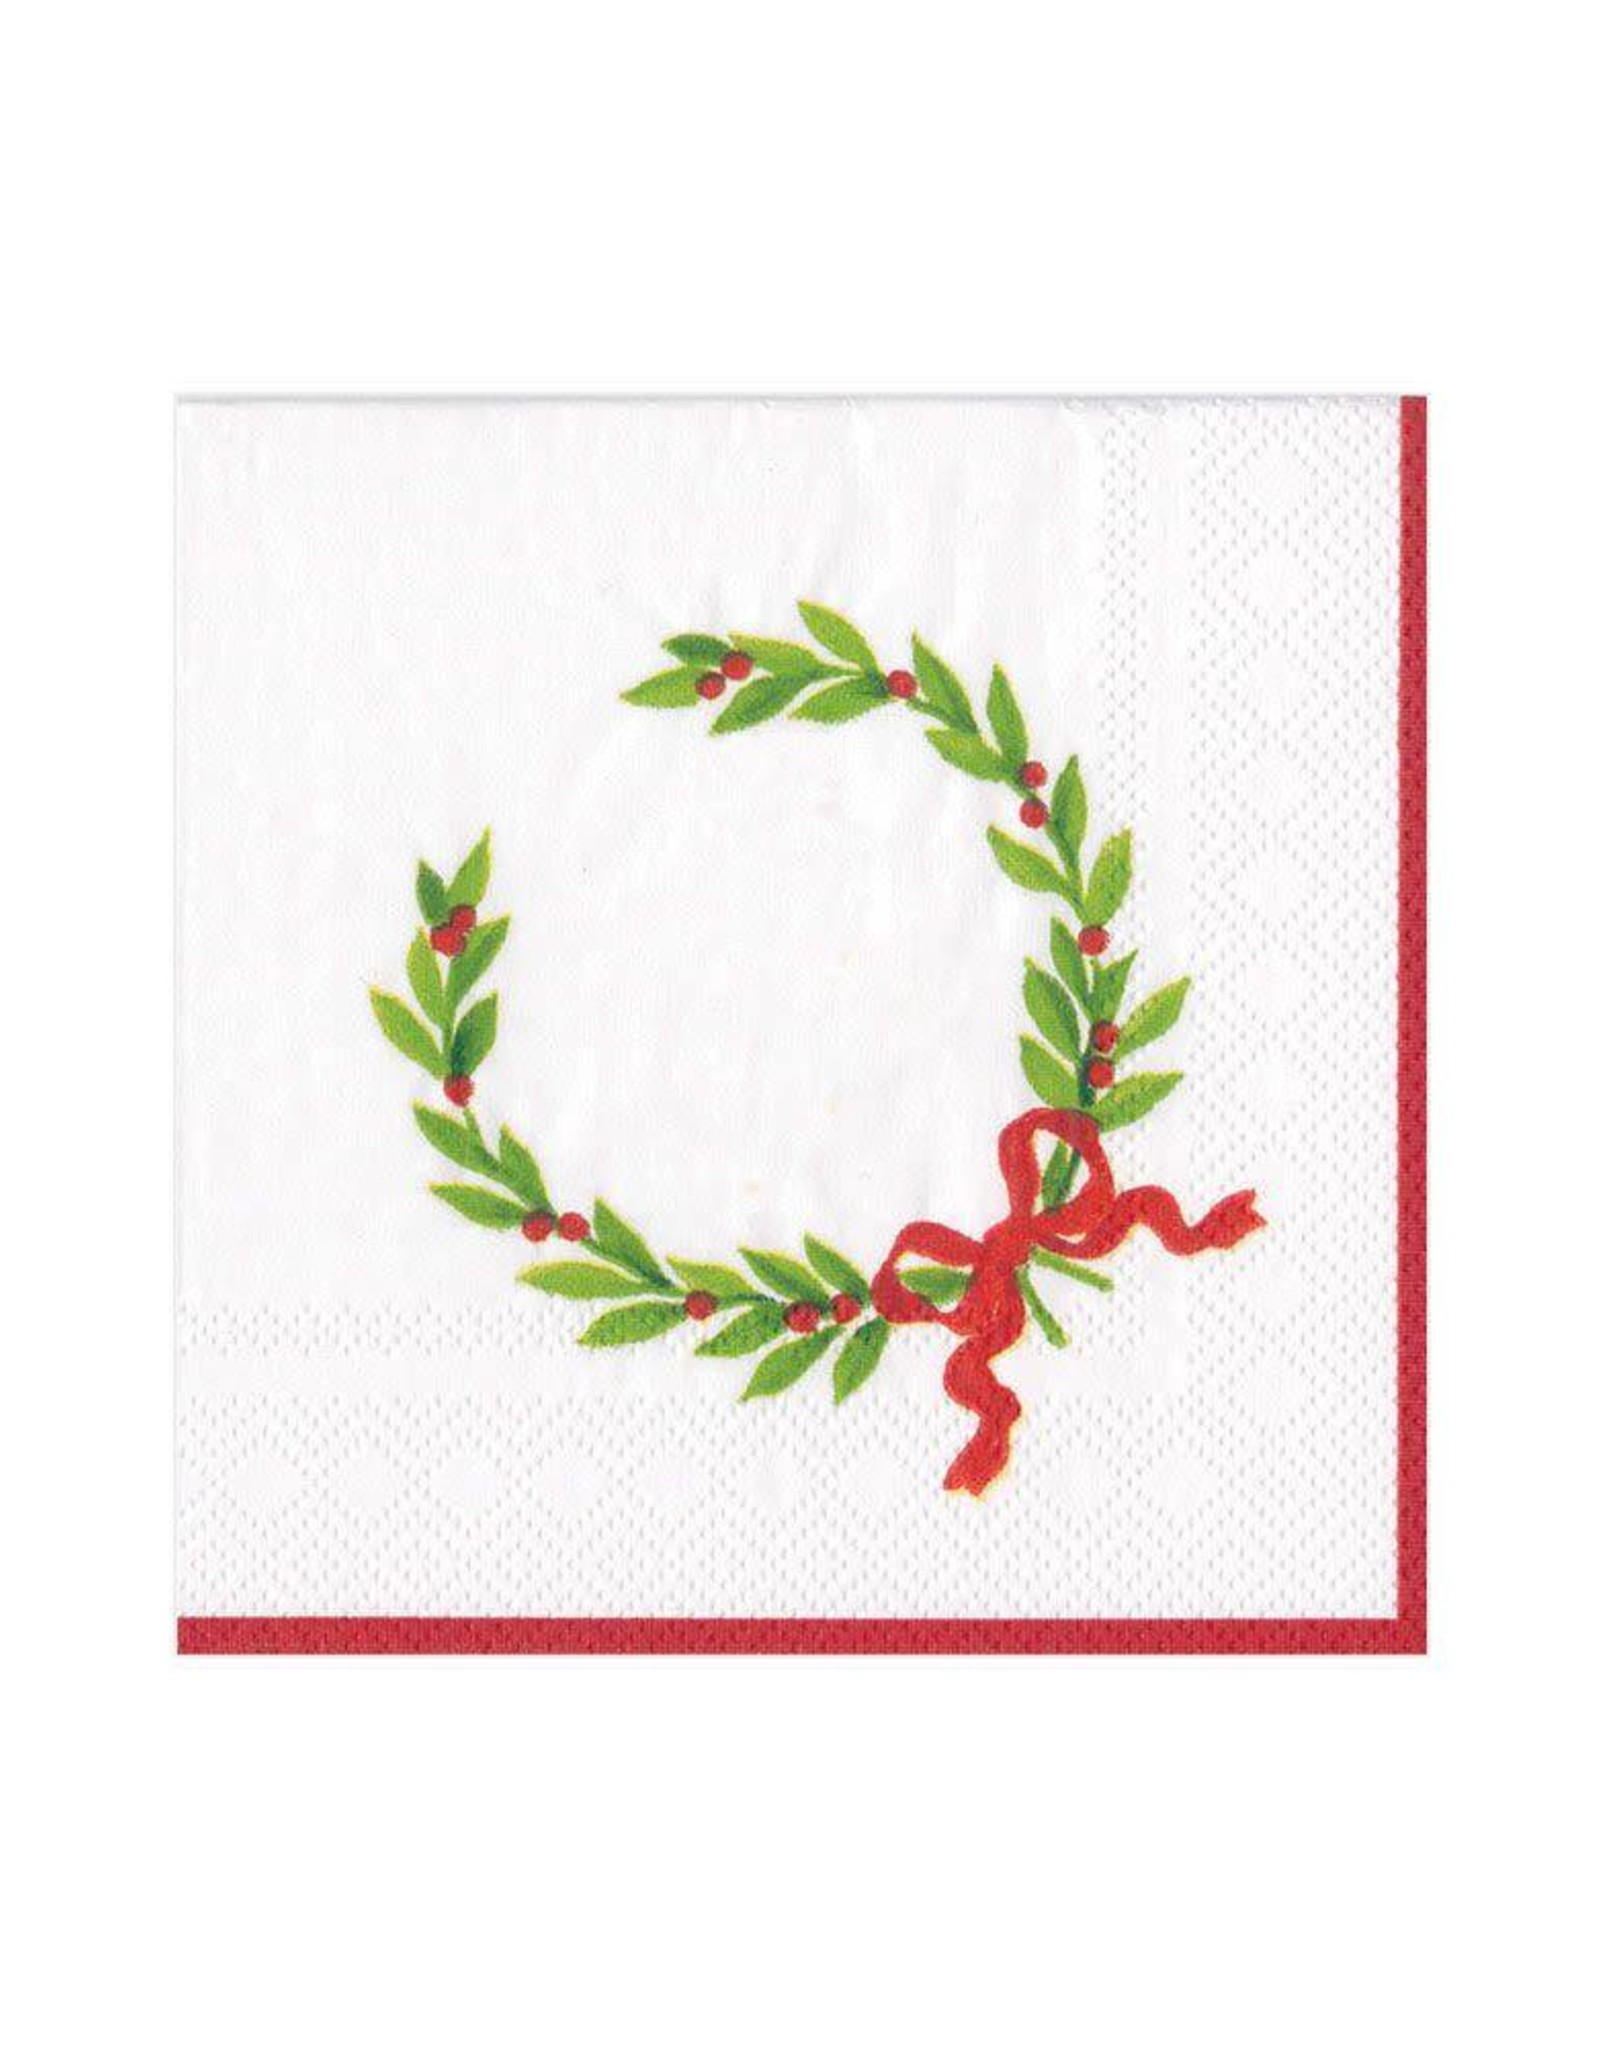 Christmas Laurel Wreath with Initial "E" Beverage Napkin (20ct)